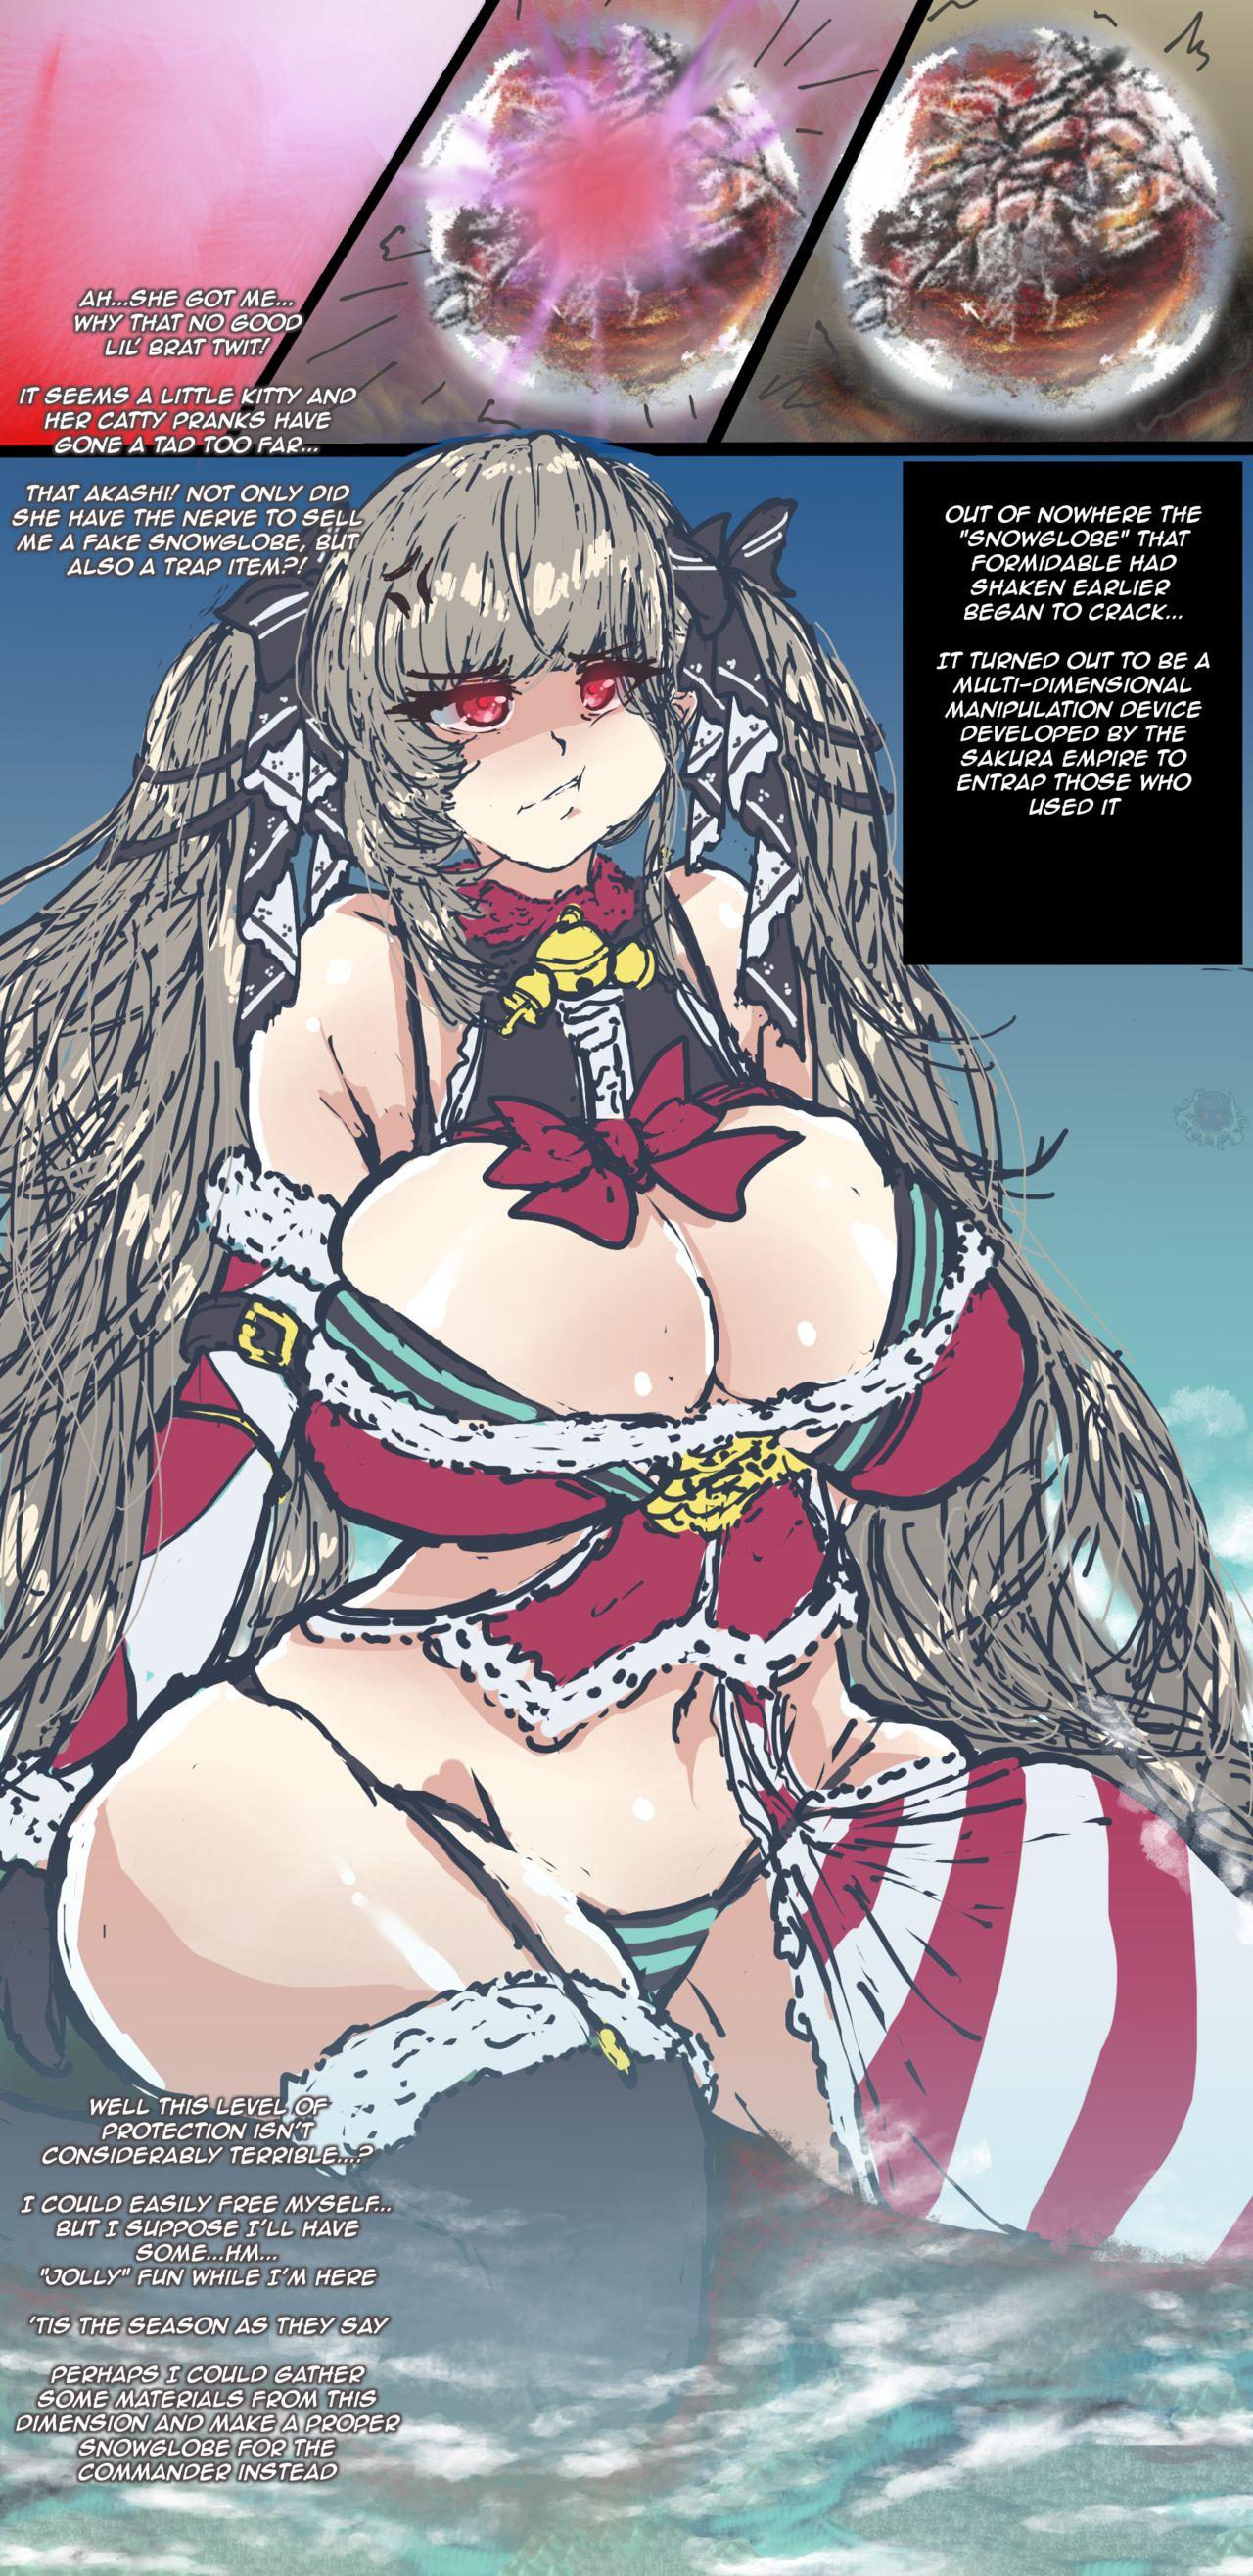 Gostoso Merry Formidable Christmas - Azur lane Amateur Teen - Page 4